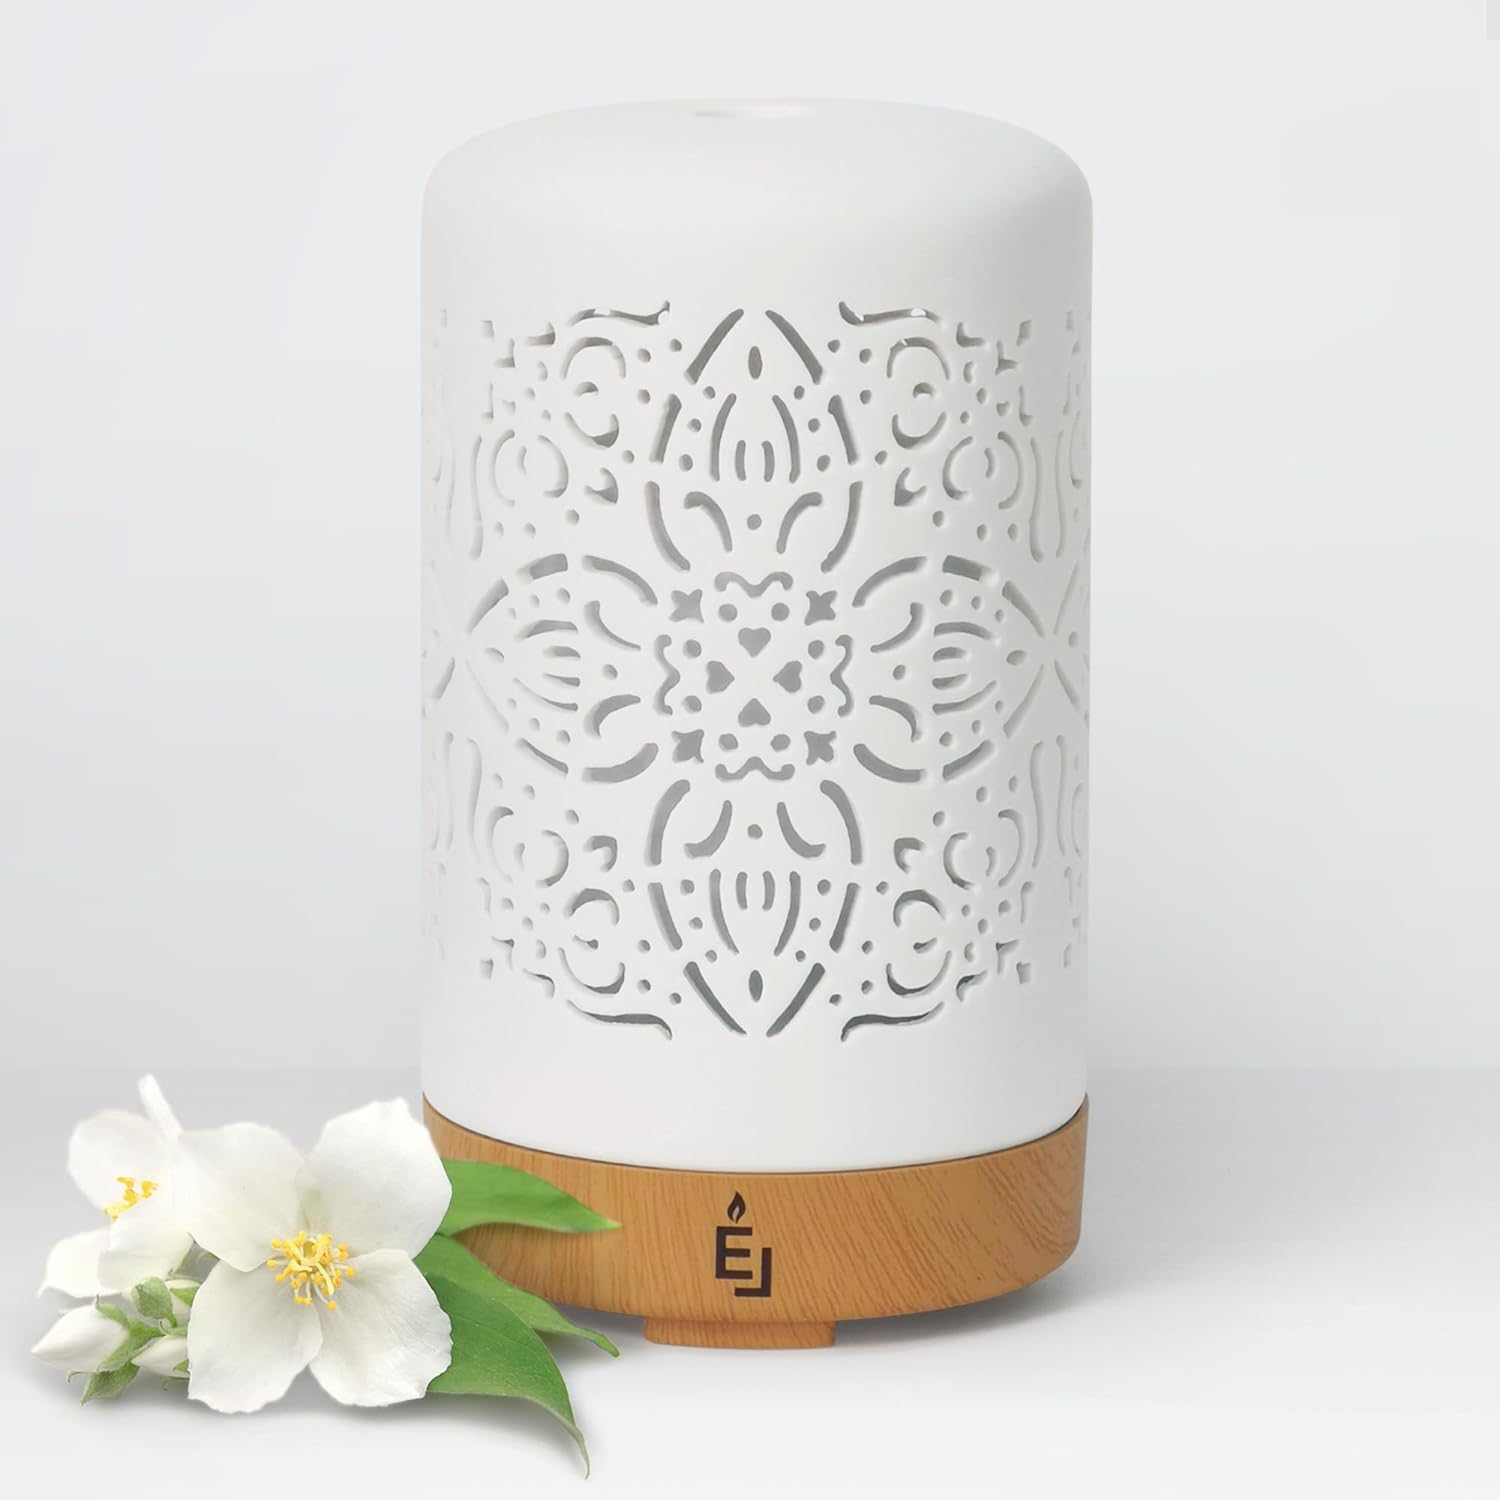 This is a gorgeous diffuser. It was perfect through Christmas and beyond with its beautiful snowflakes. The lights are great and the diffuser works well in my medium sized living room.